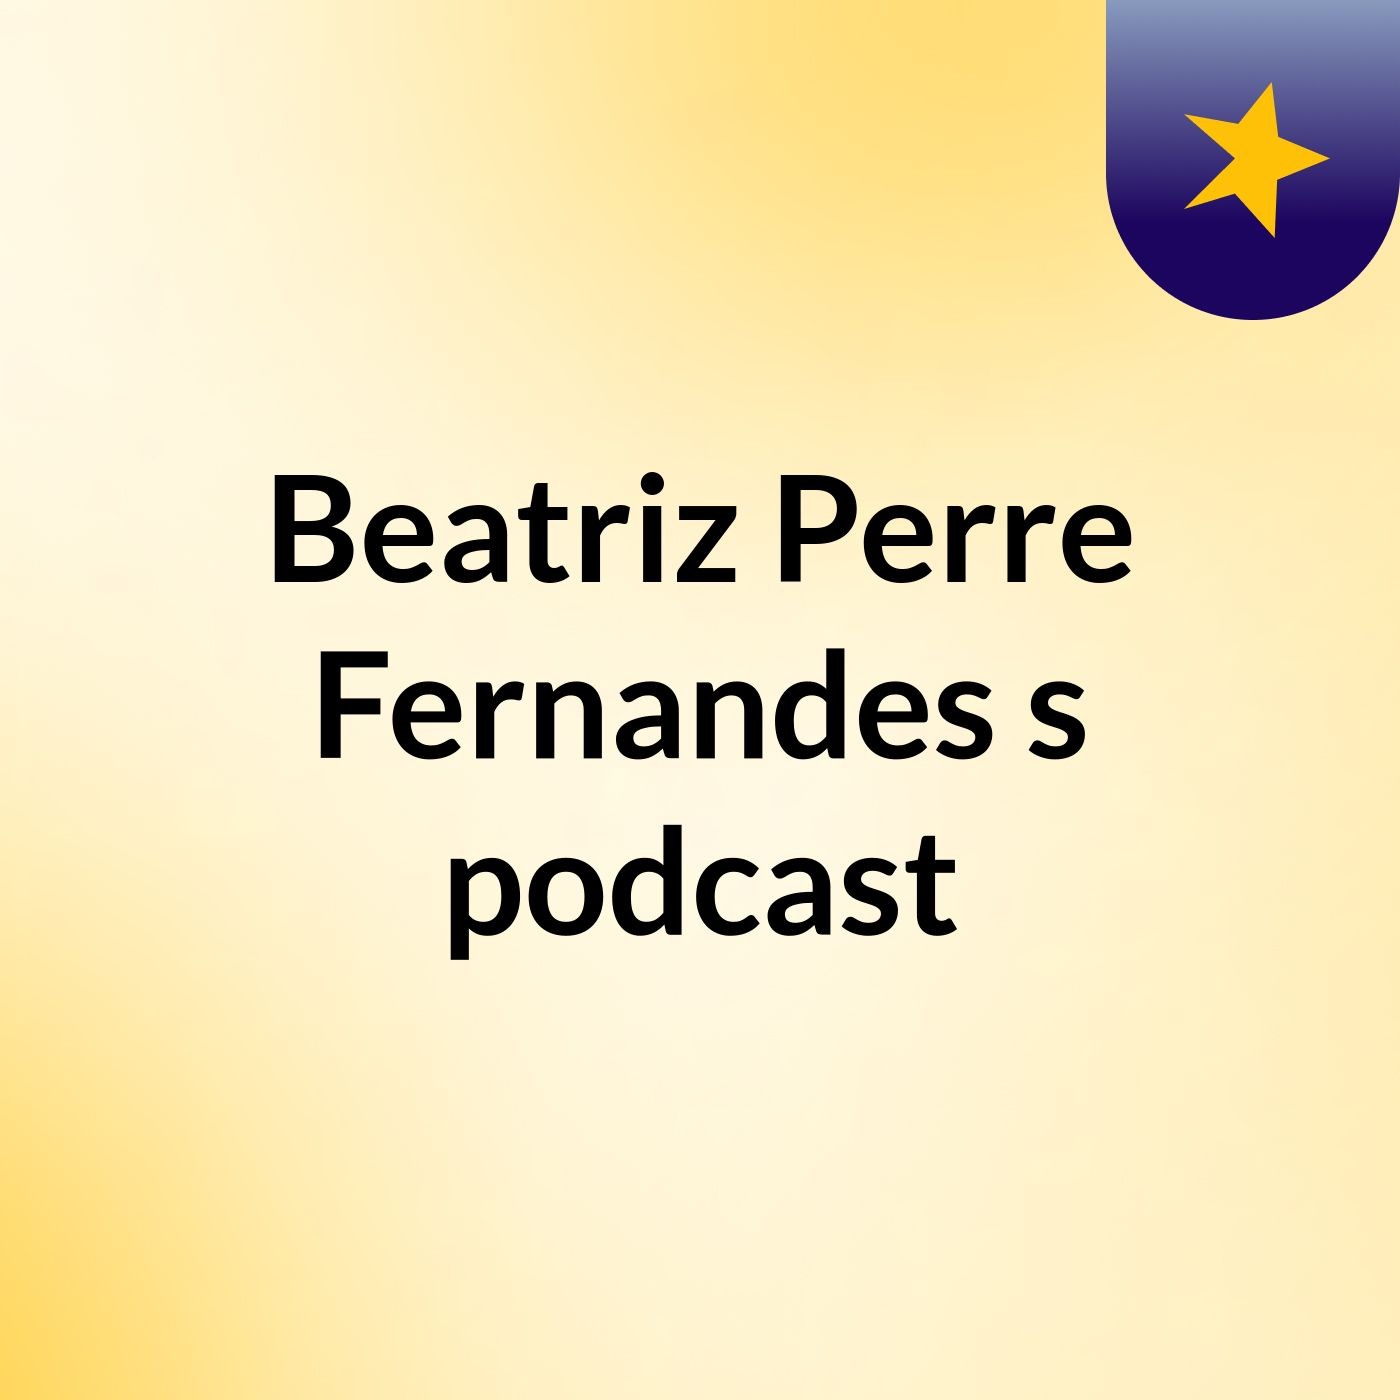 Beatriz Perre Fernandes's podcast